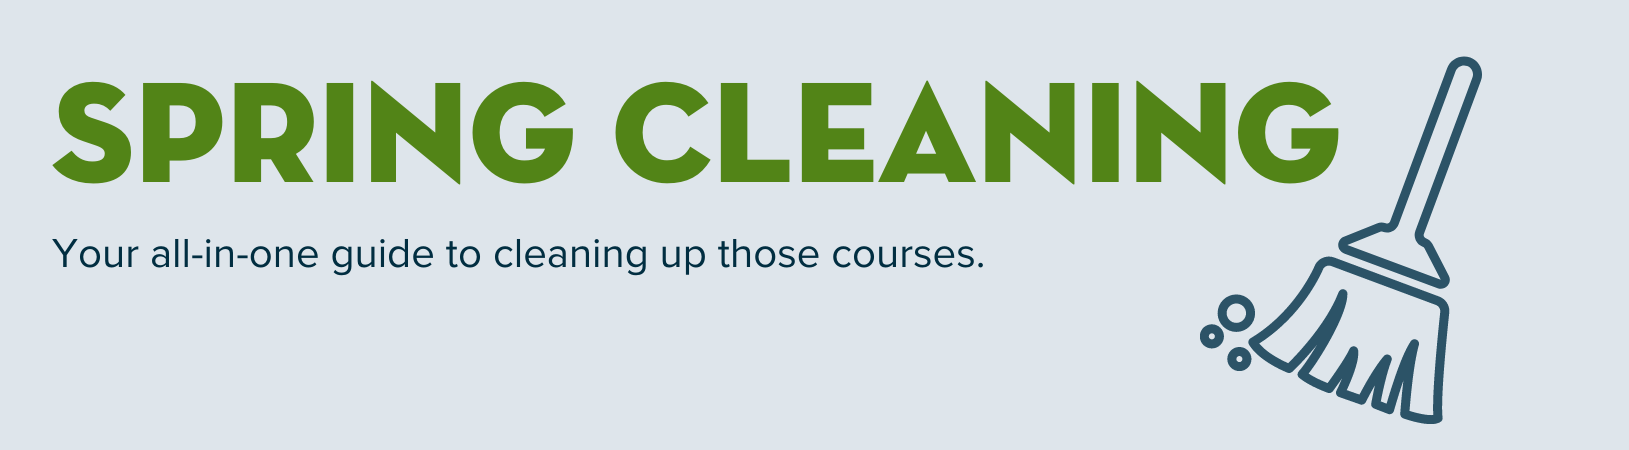 Spring Cleaning - A guide to cleaning up your courses